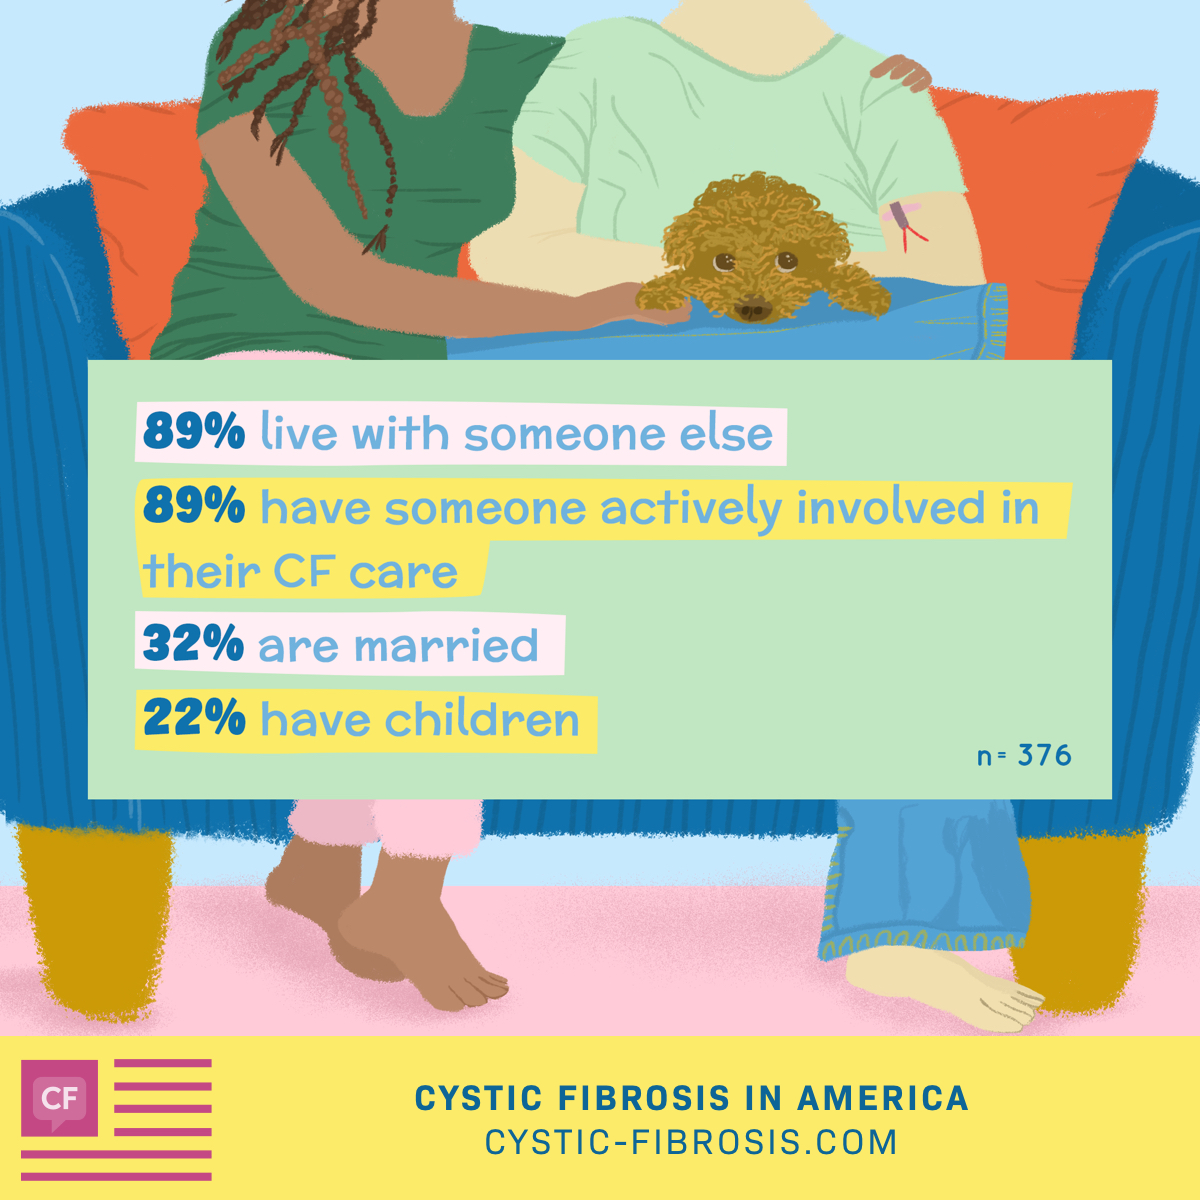 89% of respondents live with someone else, 89% have someone actively involved in their CF care, 32% are married and 22% have children